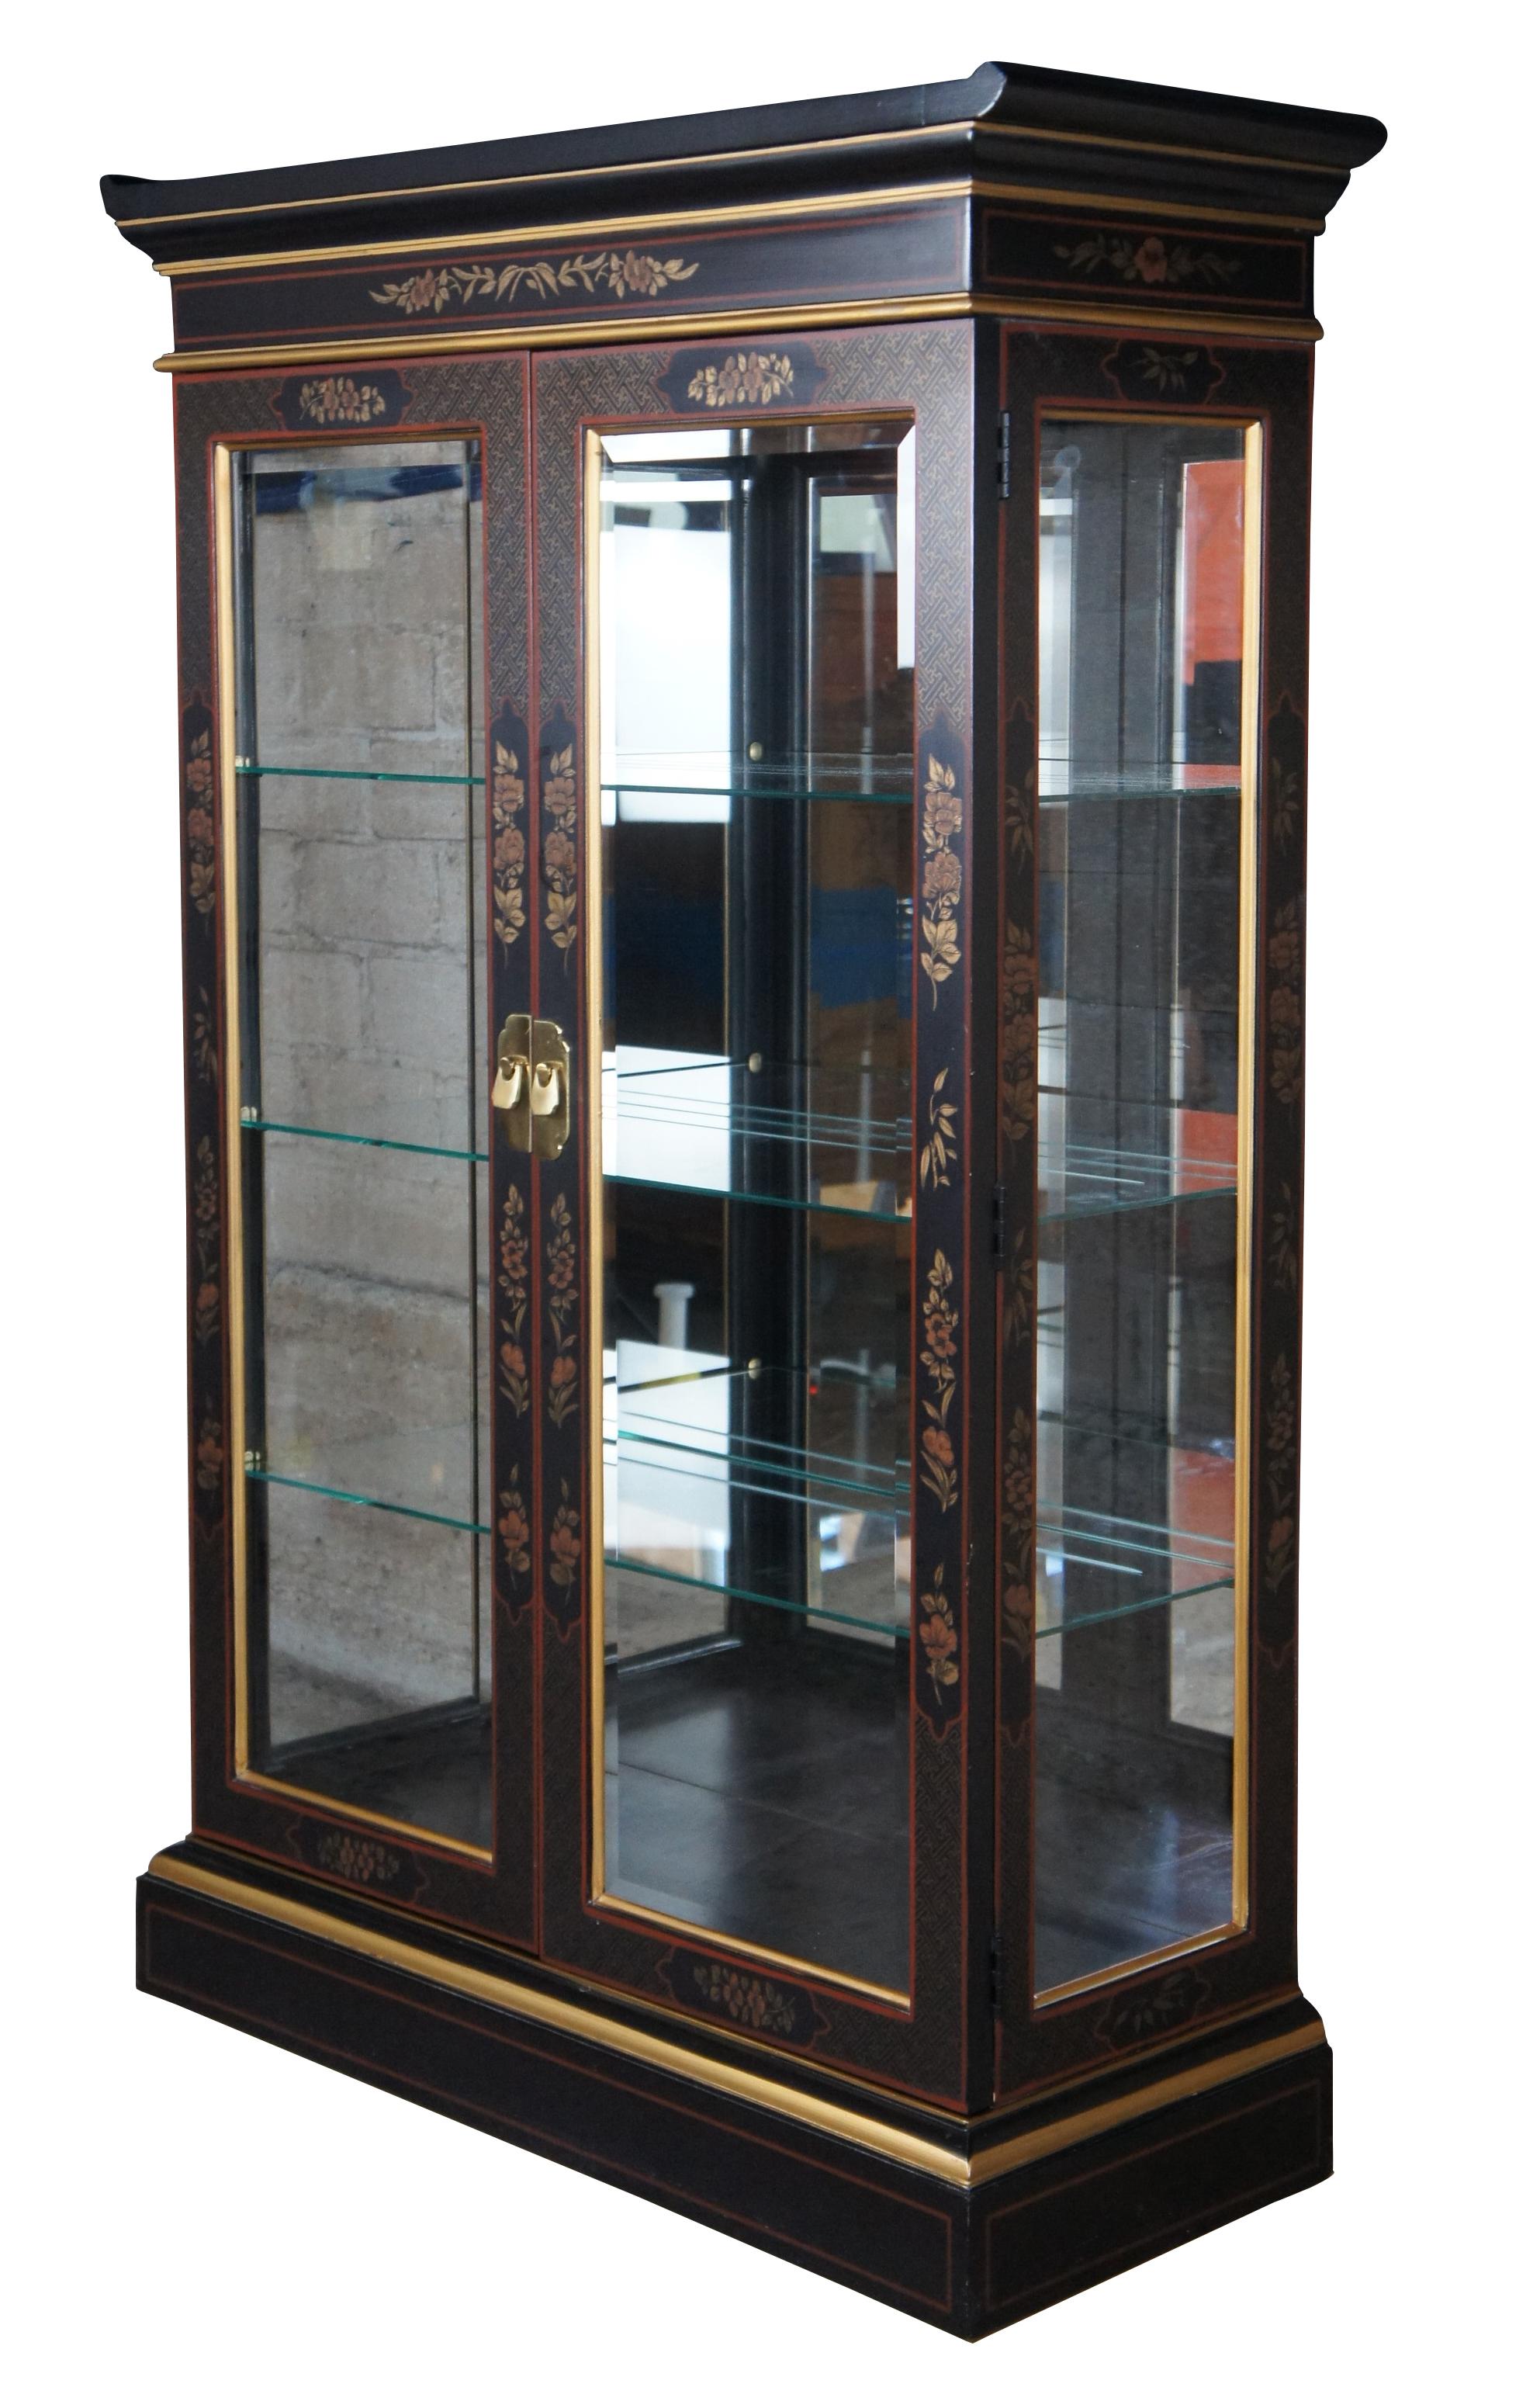 Vintage Drexel Et Cetera illuminating oriental pagoda form curio display cabinet, circa 1980s. Features black lacquer finish with gold, floral and geometric puzzled design. Includes three adjustable interior shelves with plate groves. Great for